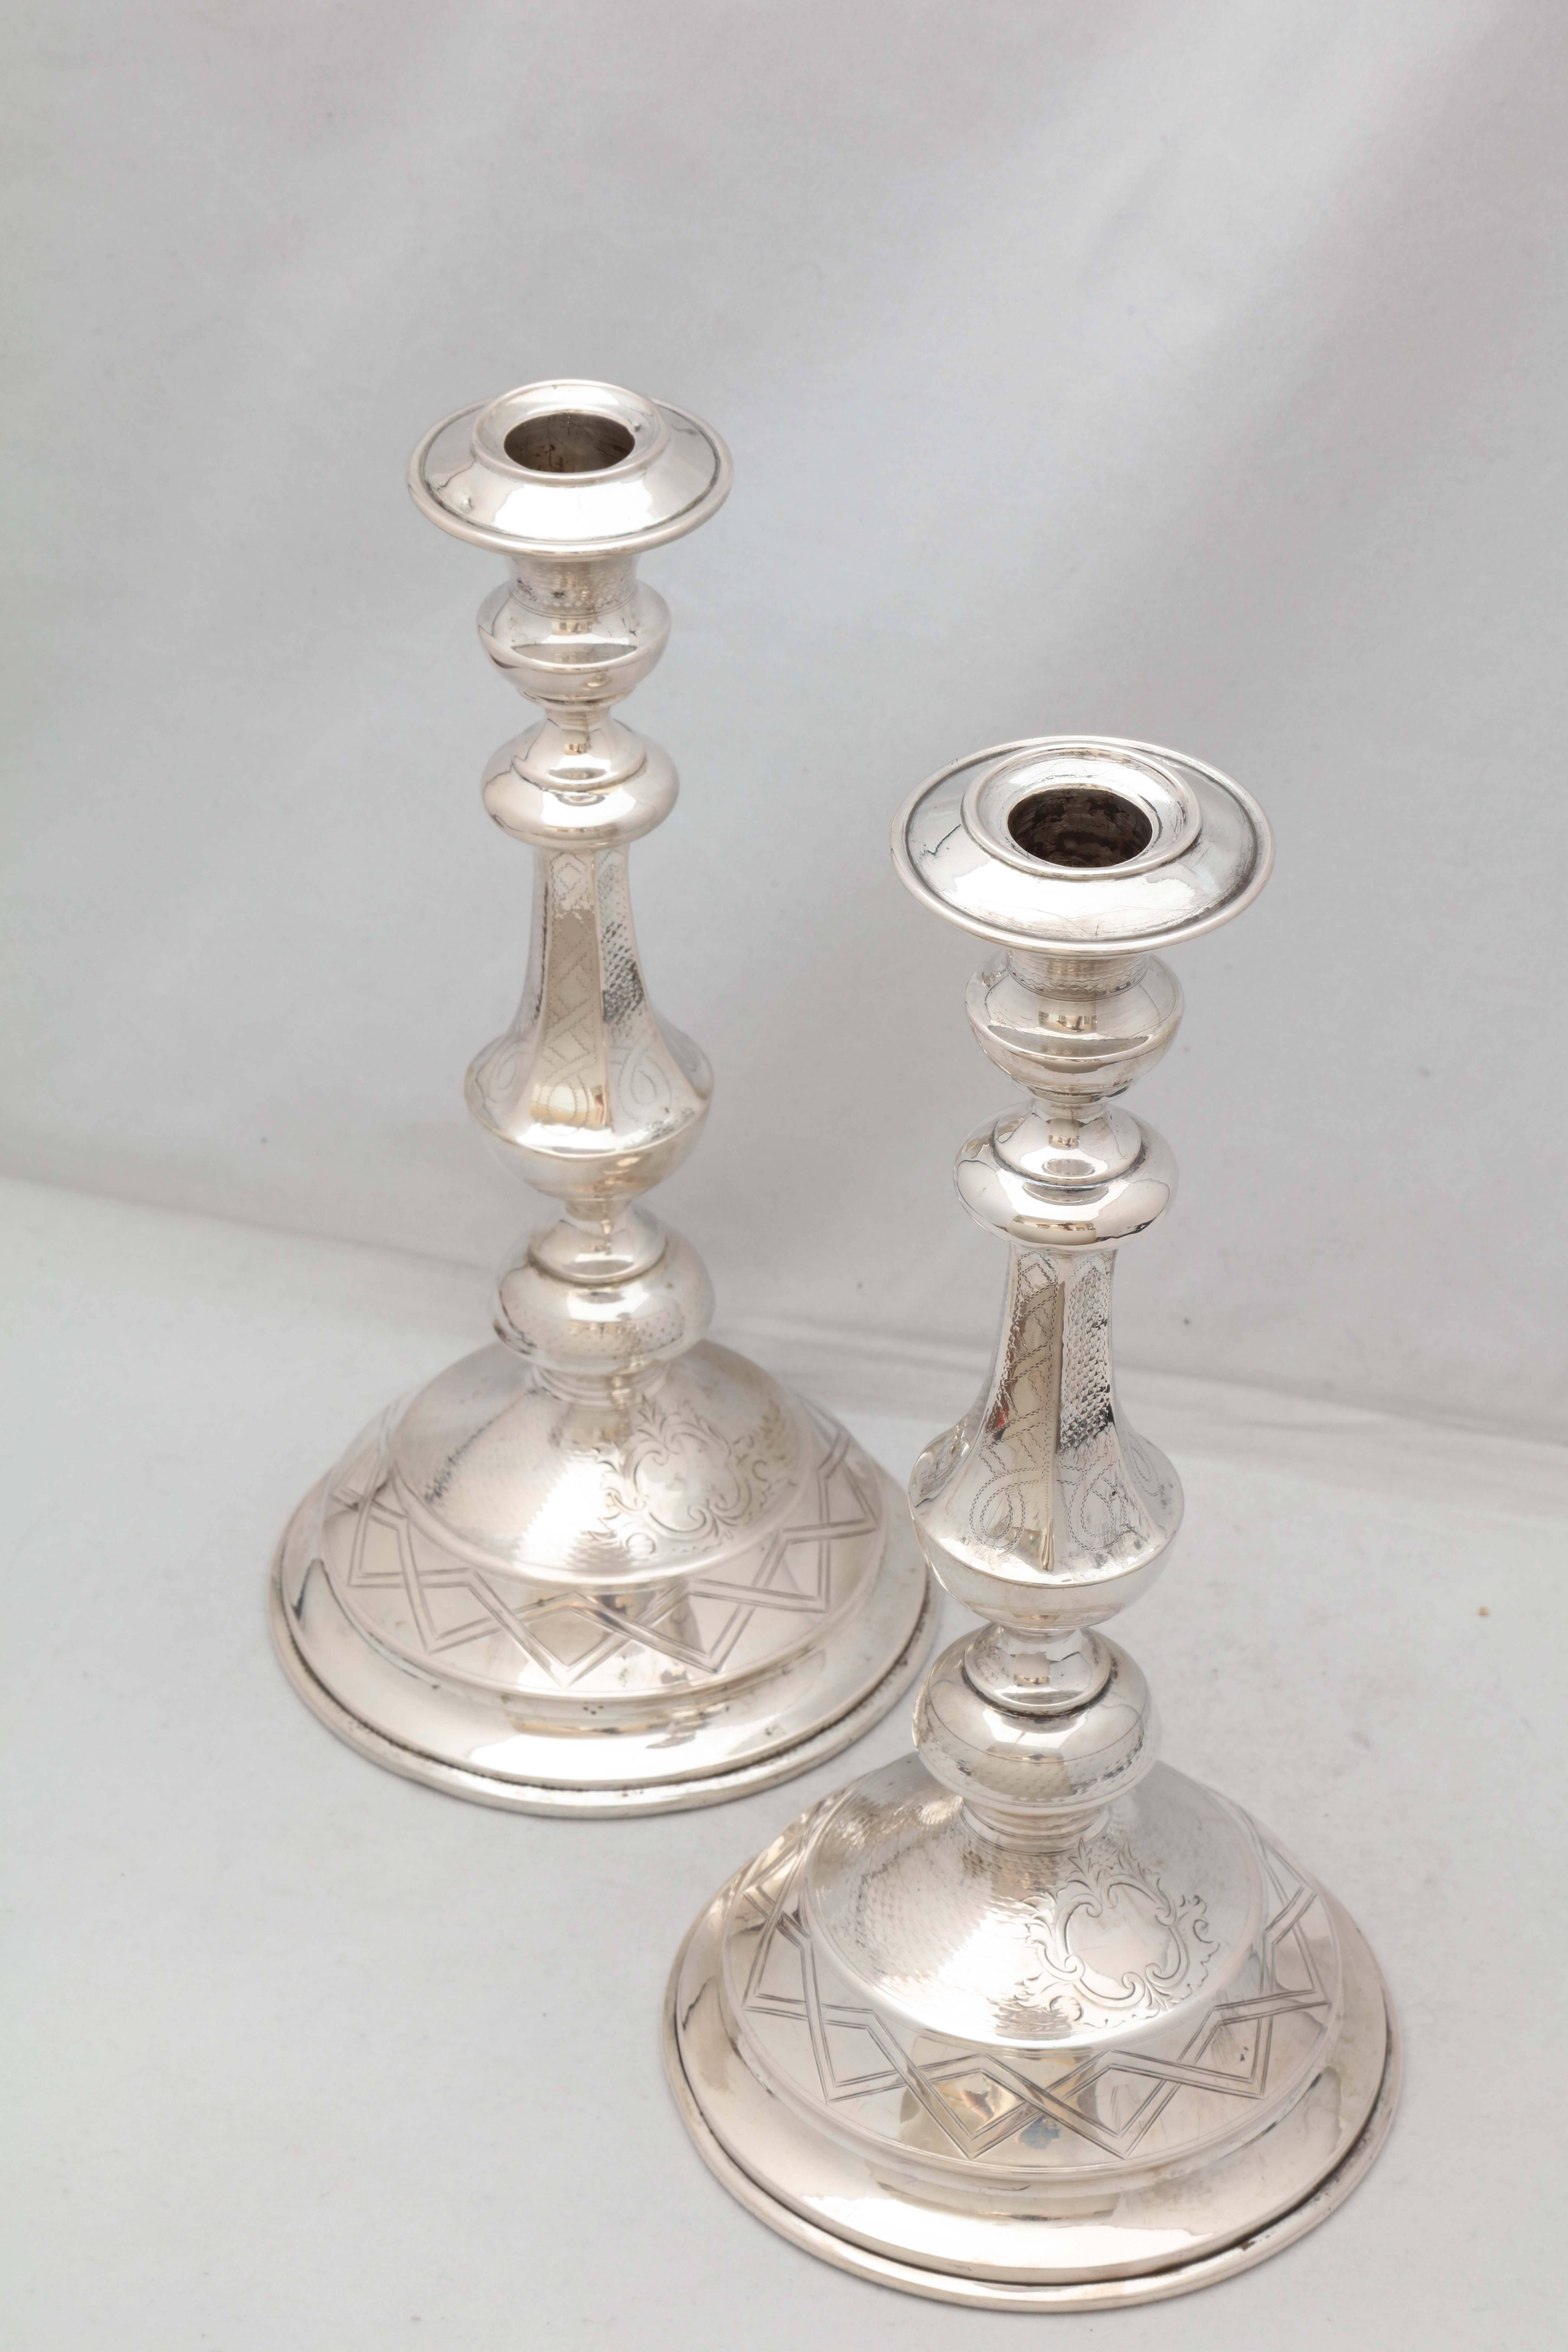 Pair of Continental silver (.800) Sabbath candlesticks, Austria, circa 1870. Each candlestick measures: 10 1/4 inches high x 5 1/4 inches diameter across its  base. Unweighted - total weight for the pair is 13.365 troy ounces. Dark areas on silver 